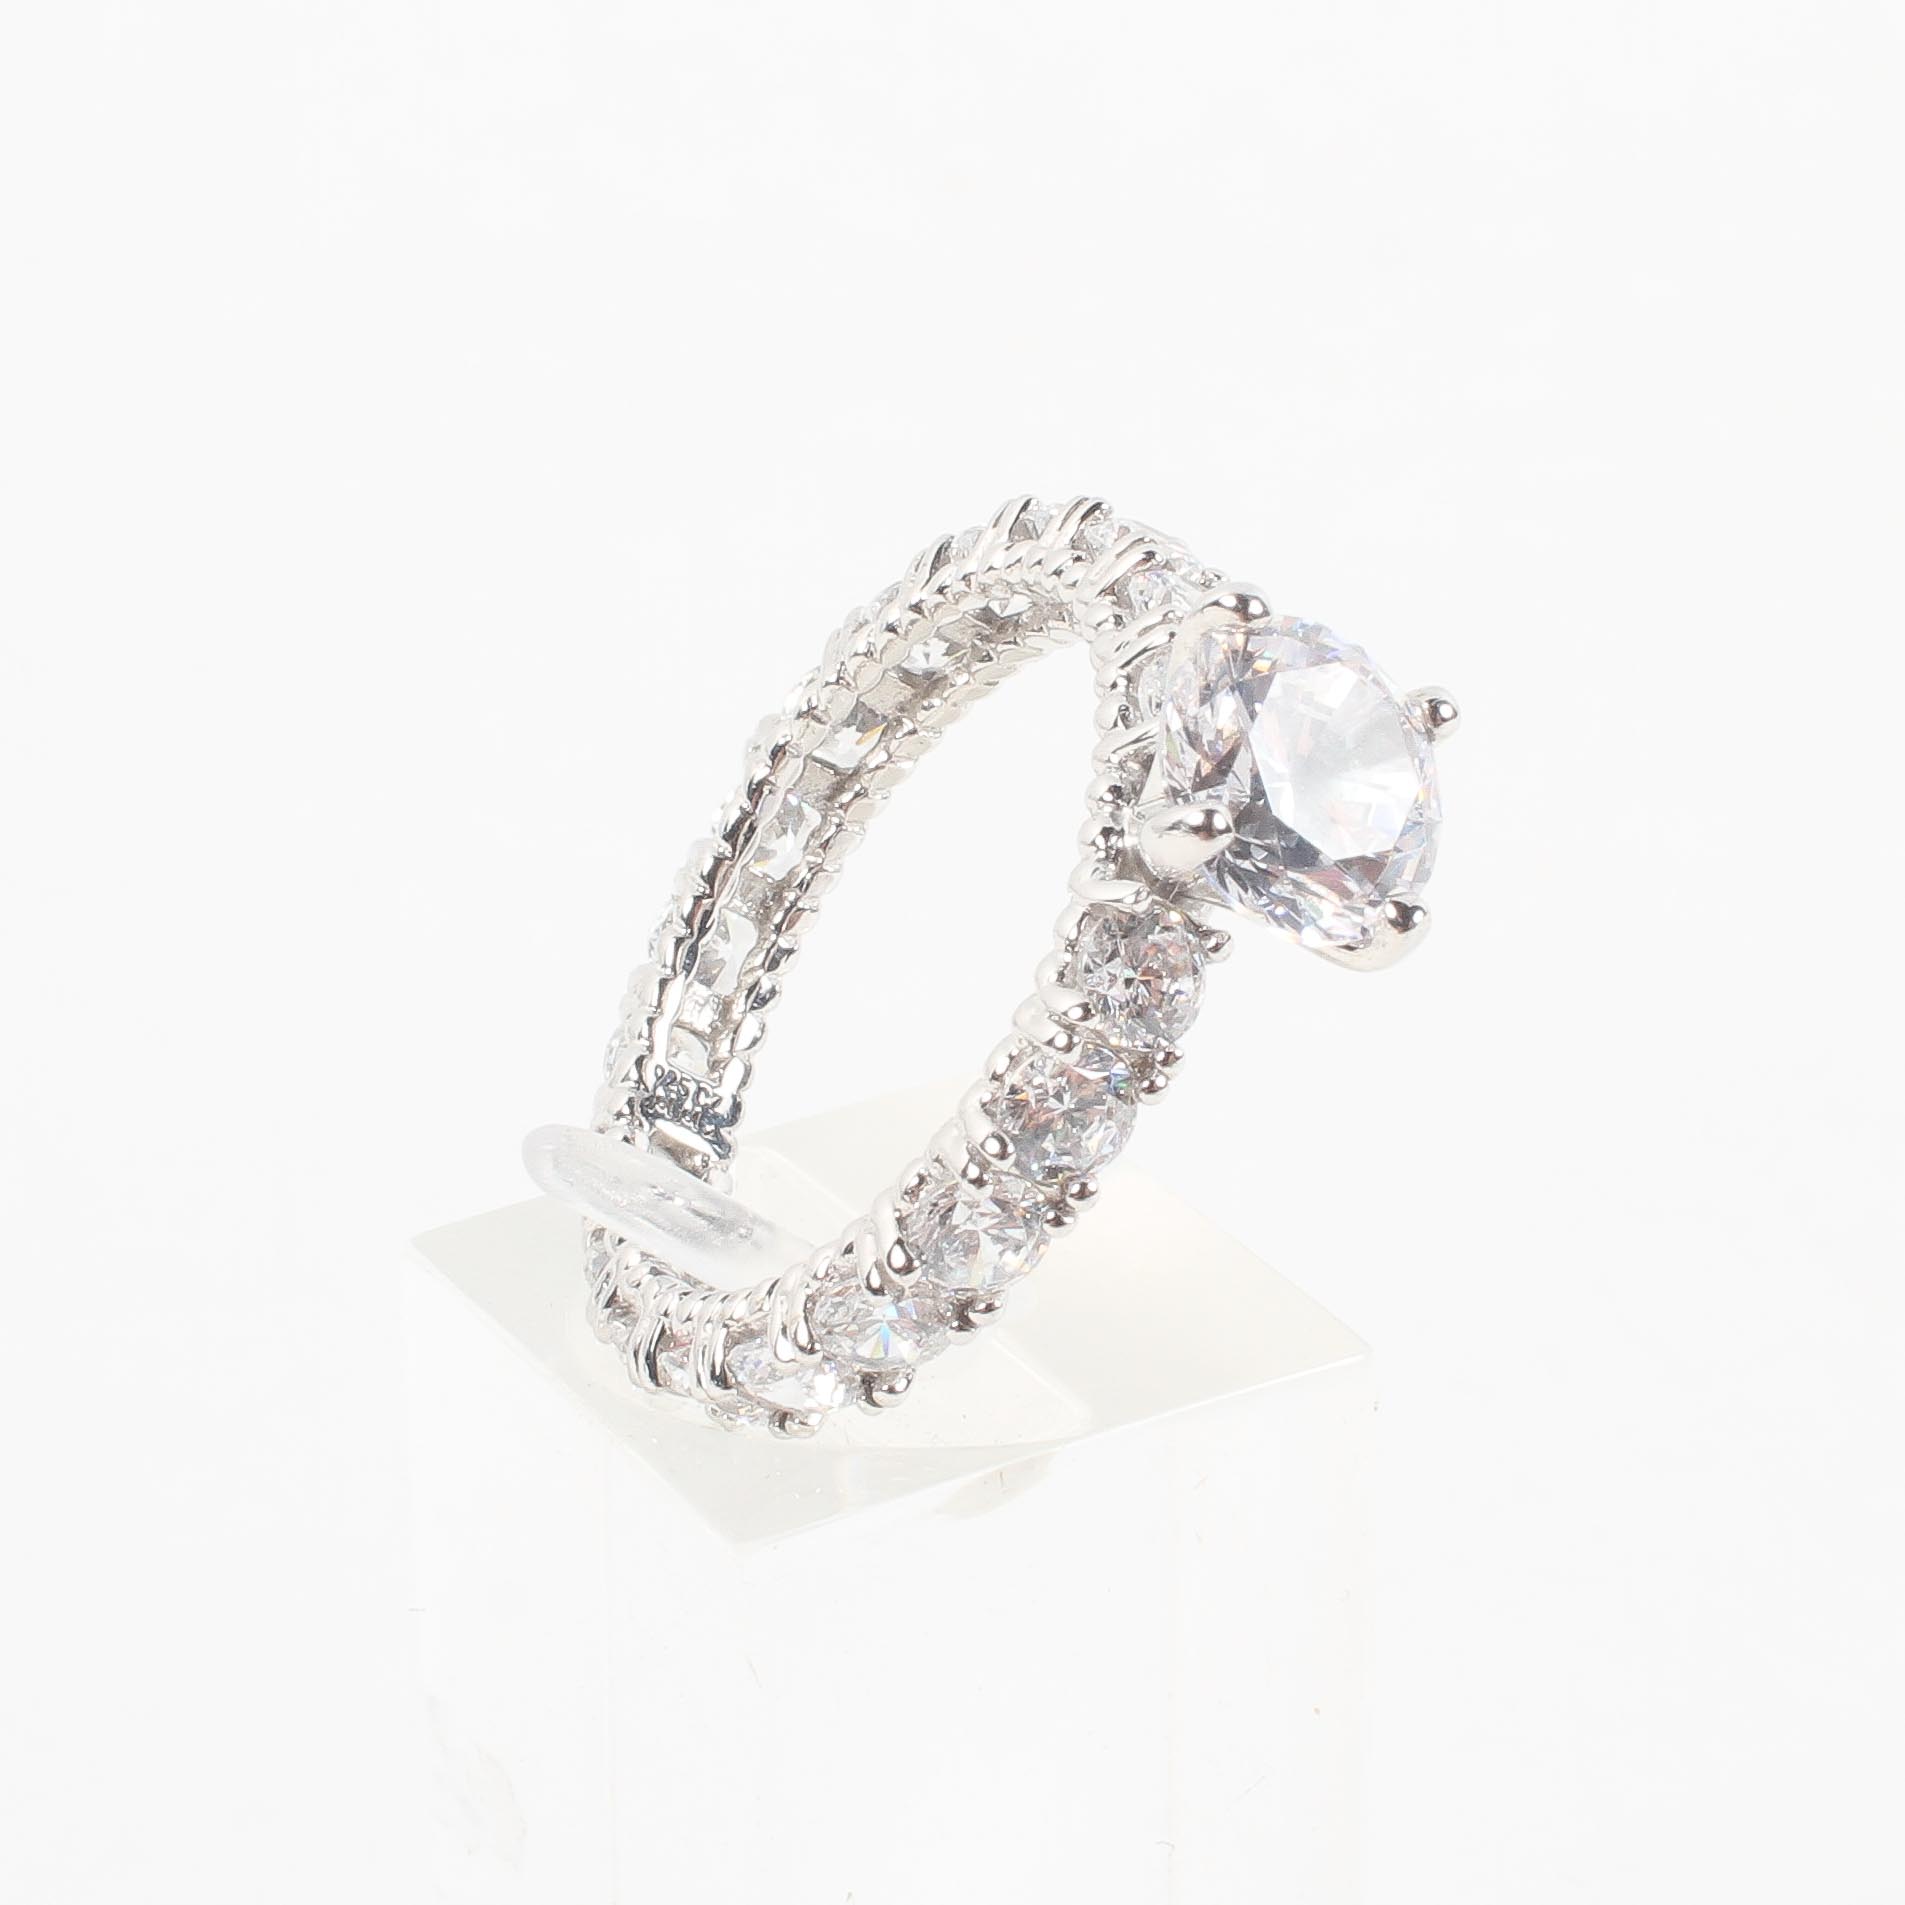 A sterling silver dress ring